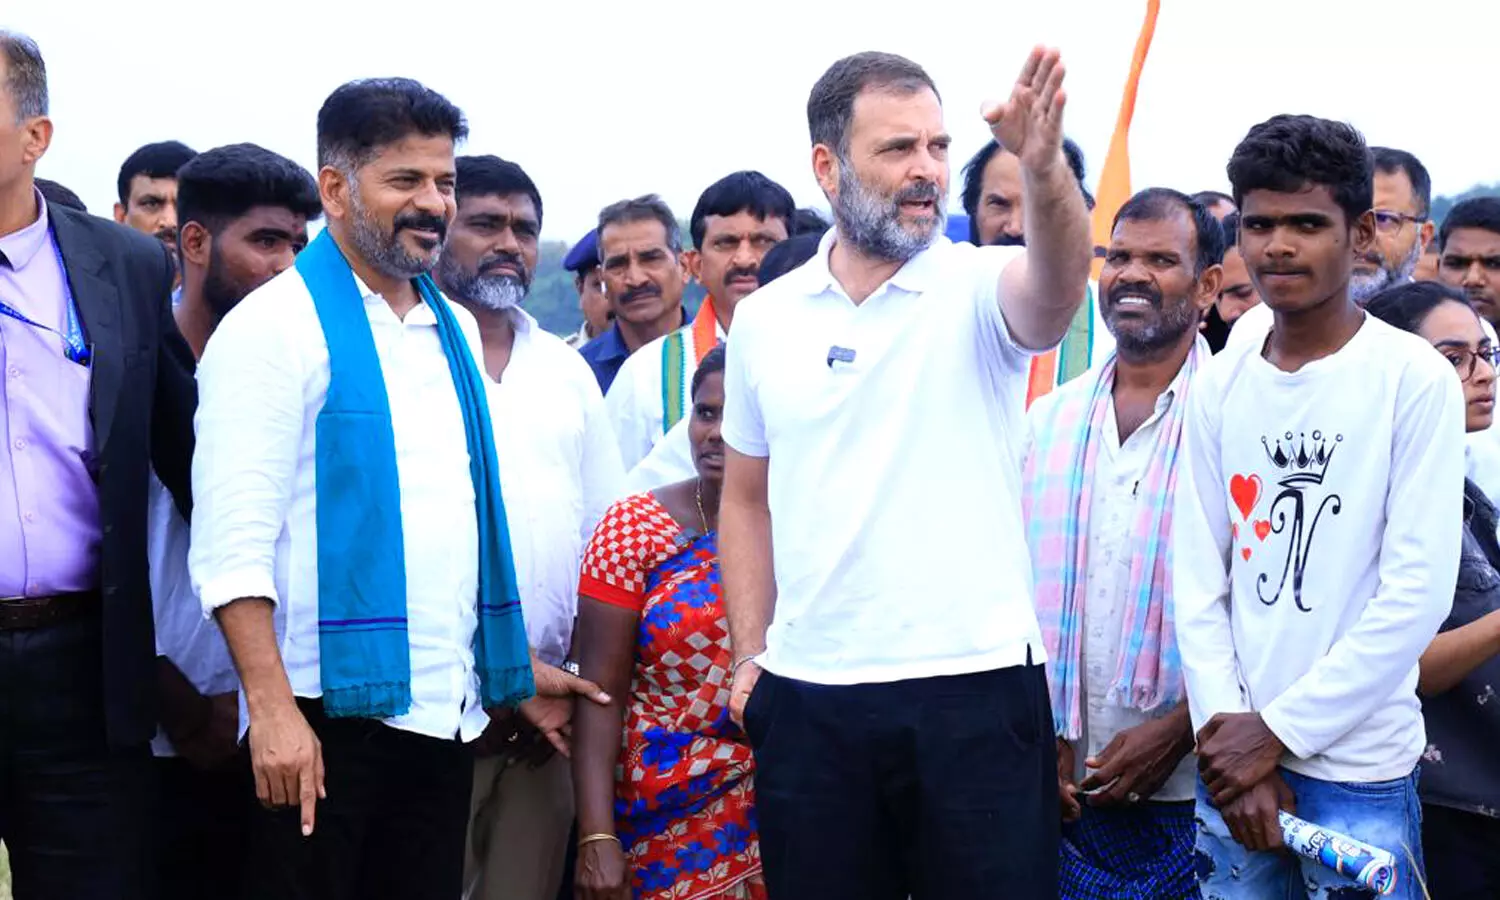 Congress will return entire money “looted by KCR,” his family, says Rahul Gandhi